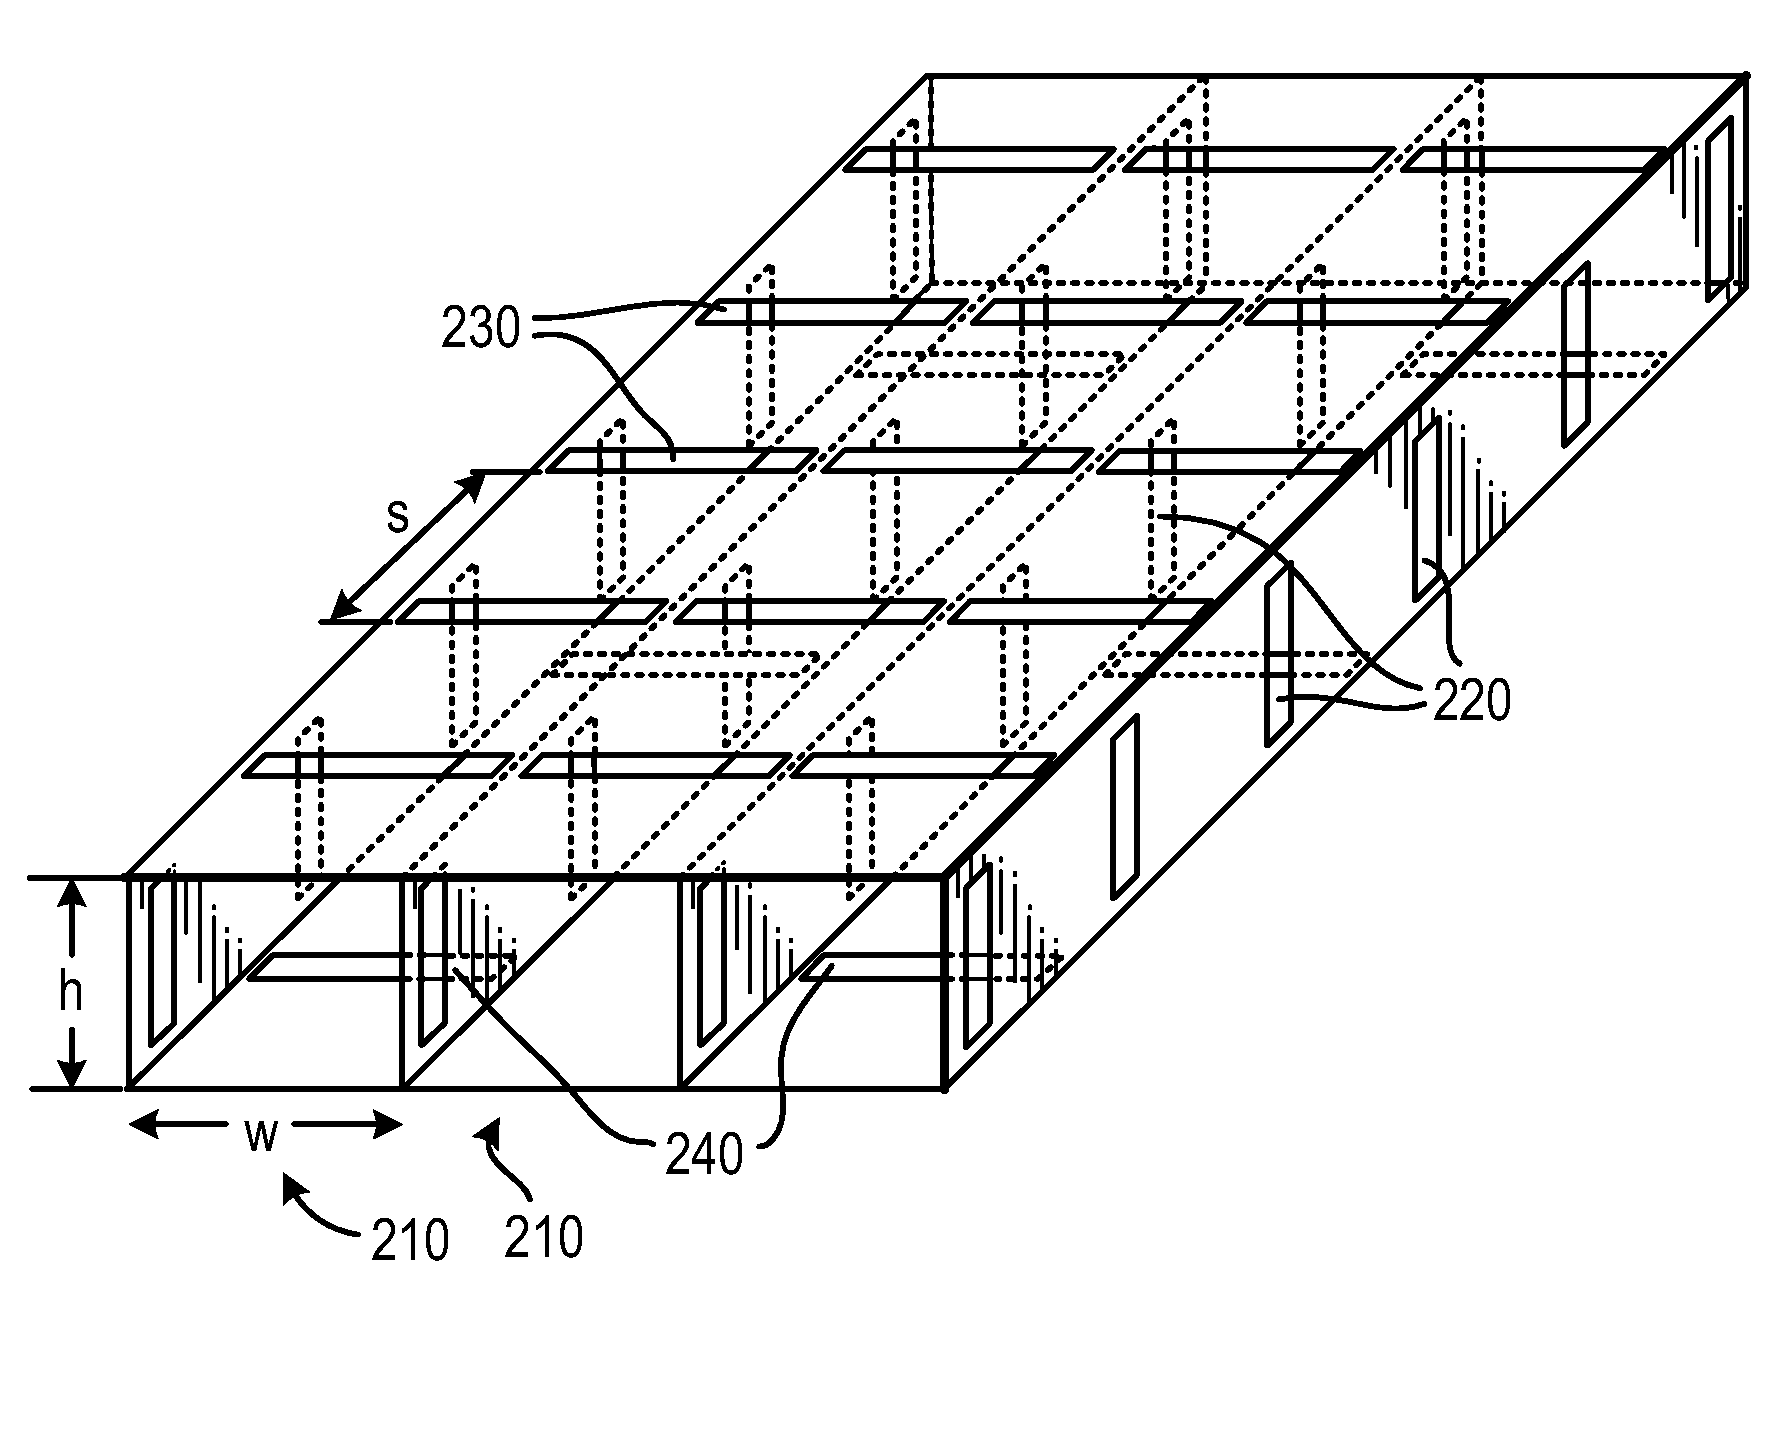 Element Reduction In Phased Arrays With Cladding